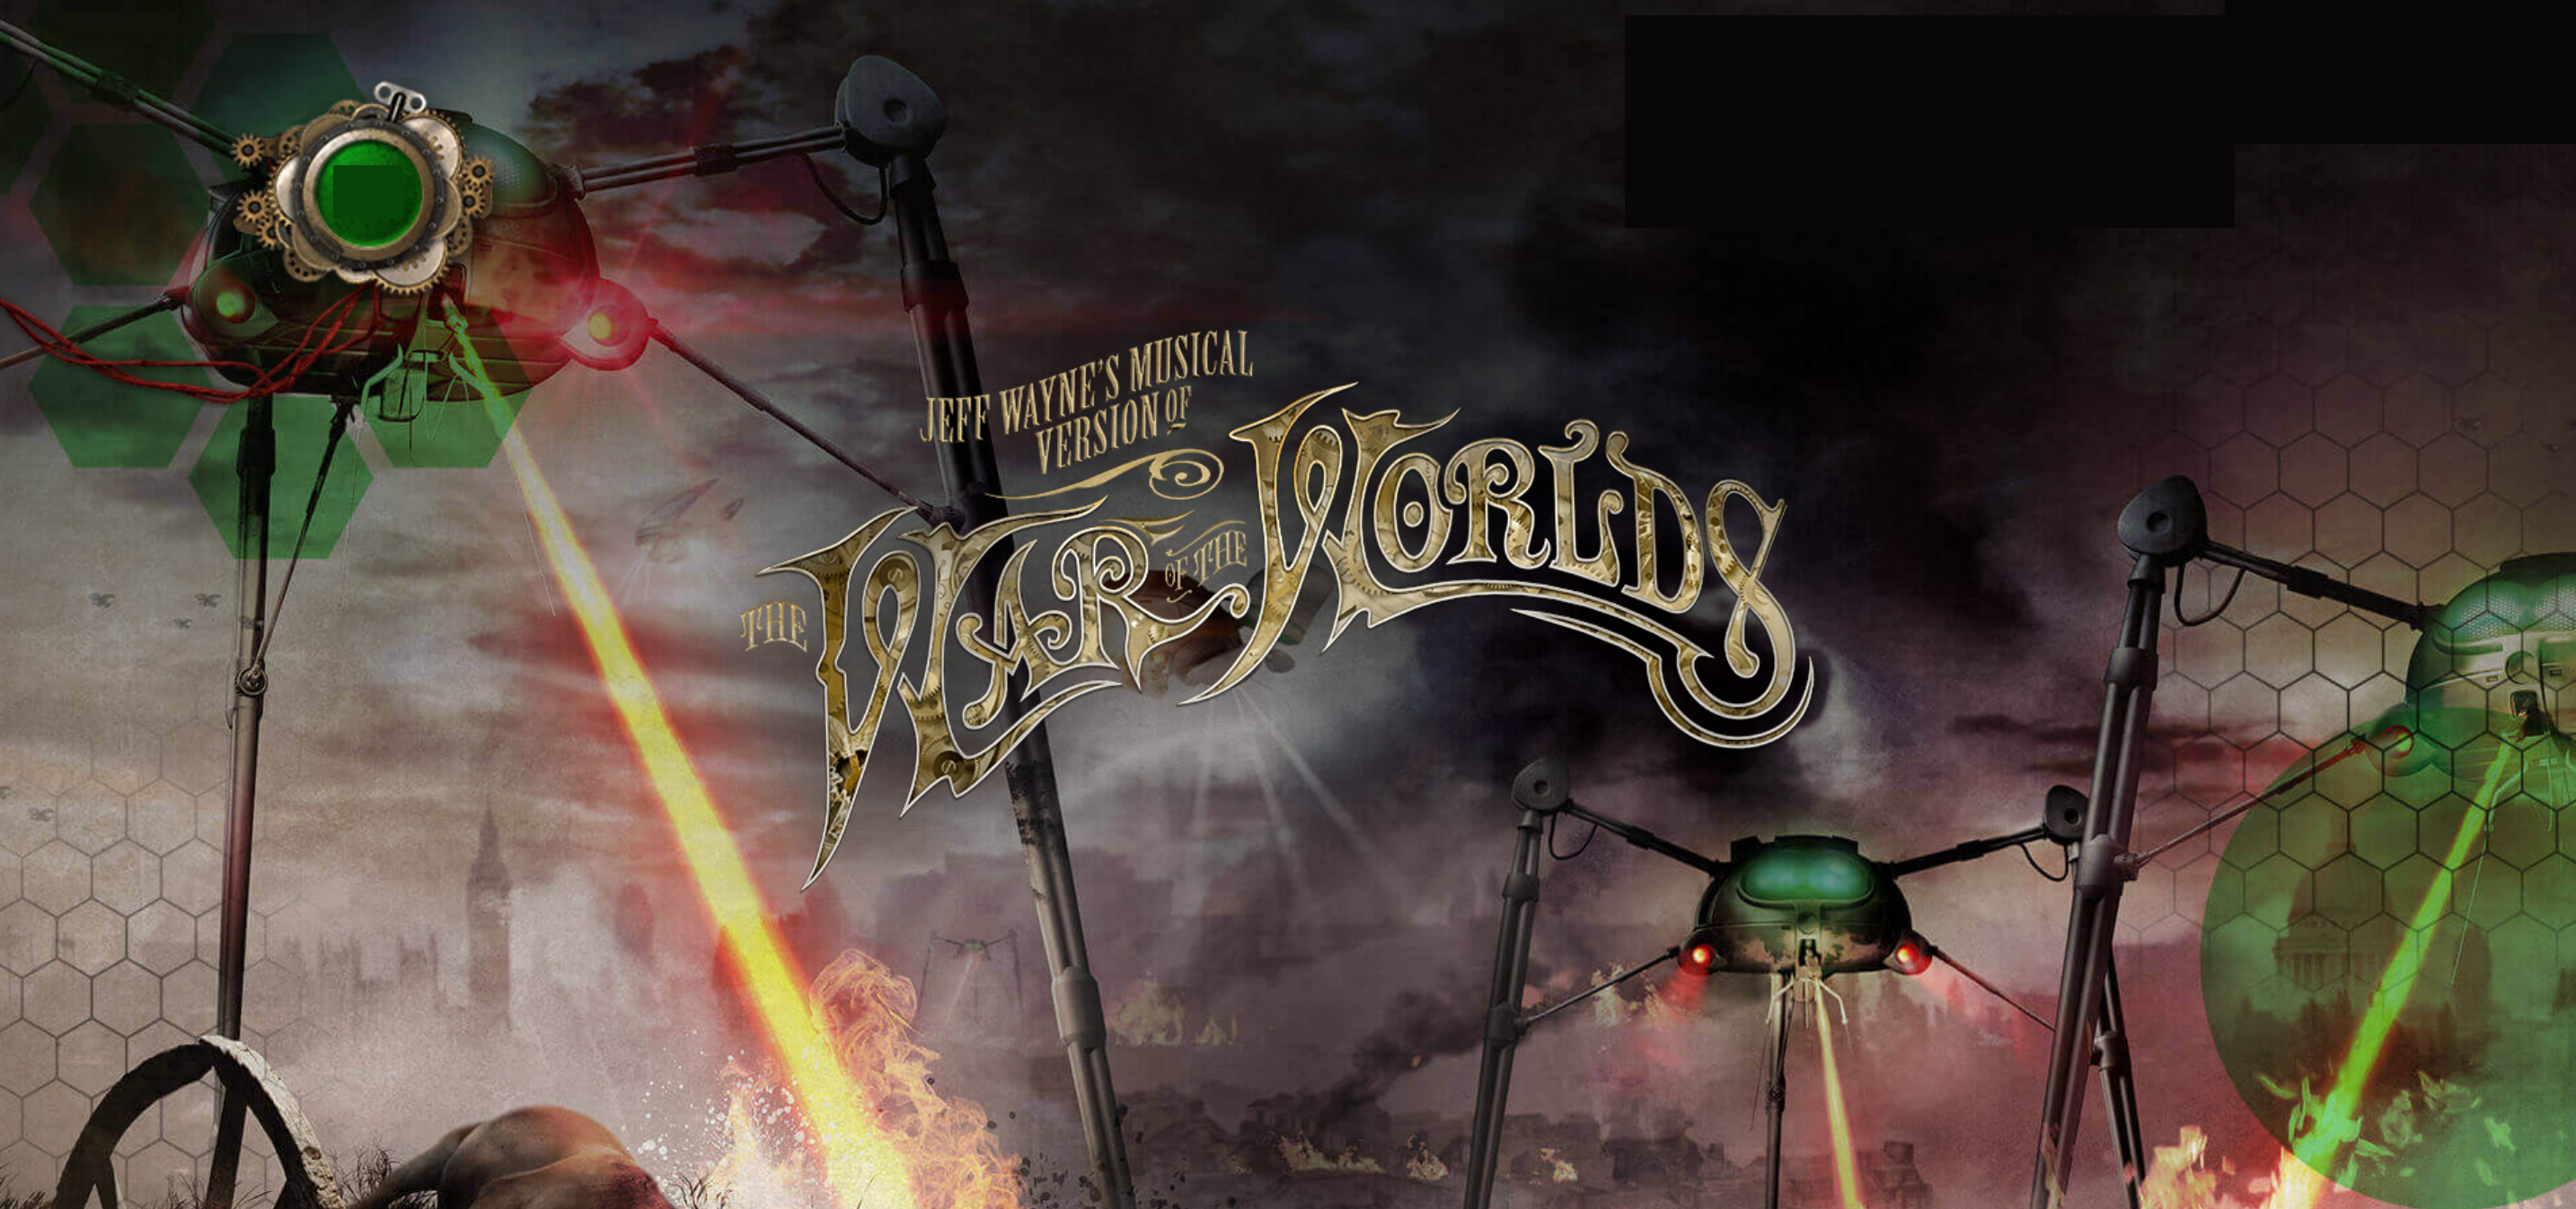 Jeff Wayne’s Musical Version of the War of the Worlds.